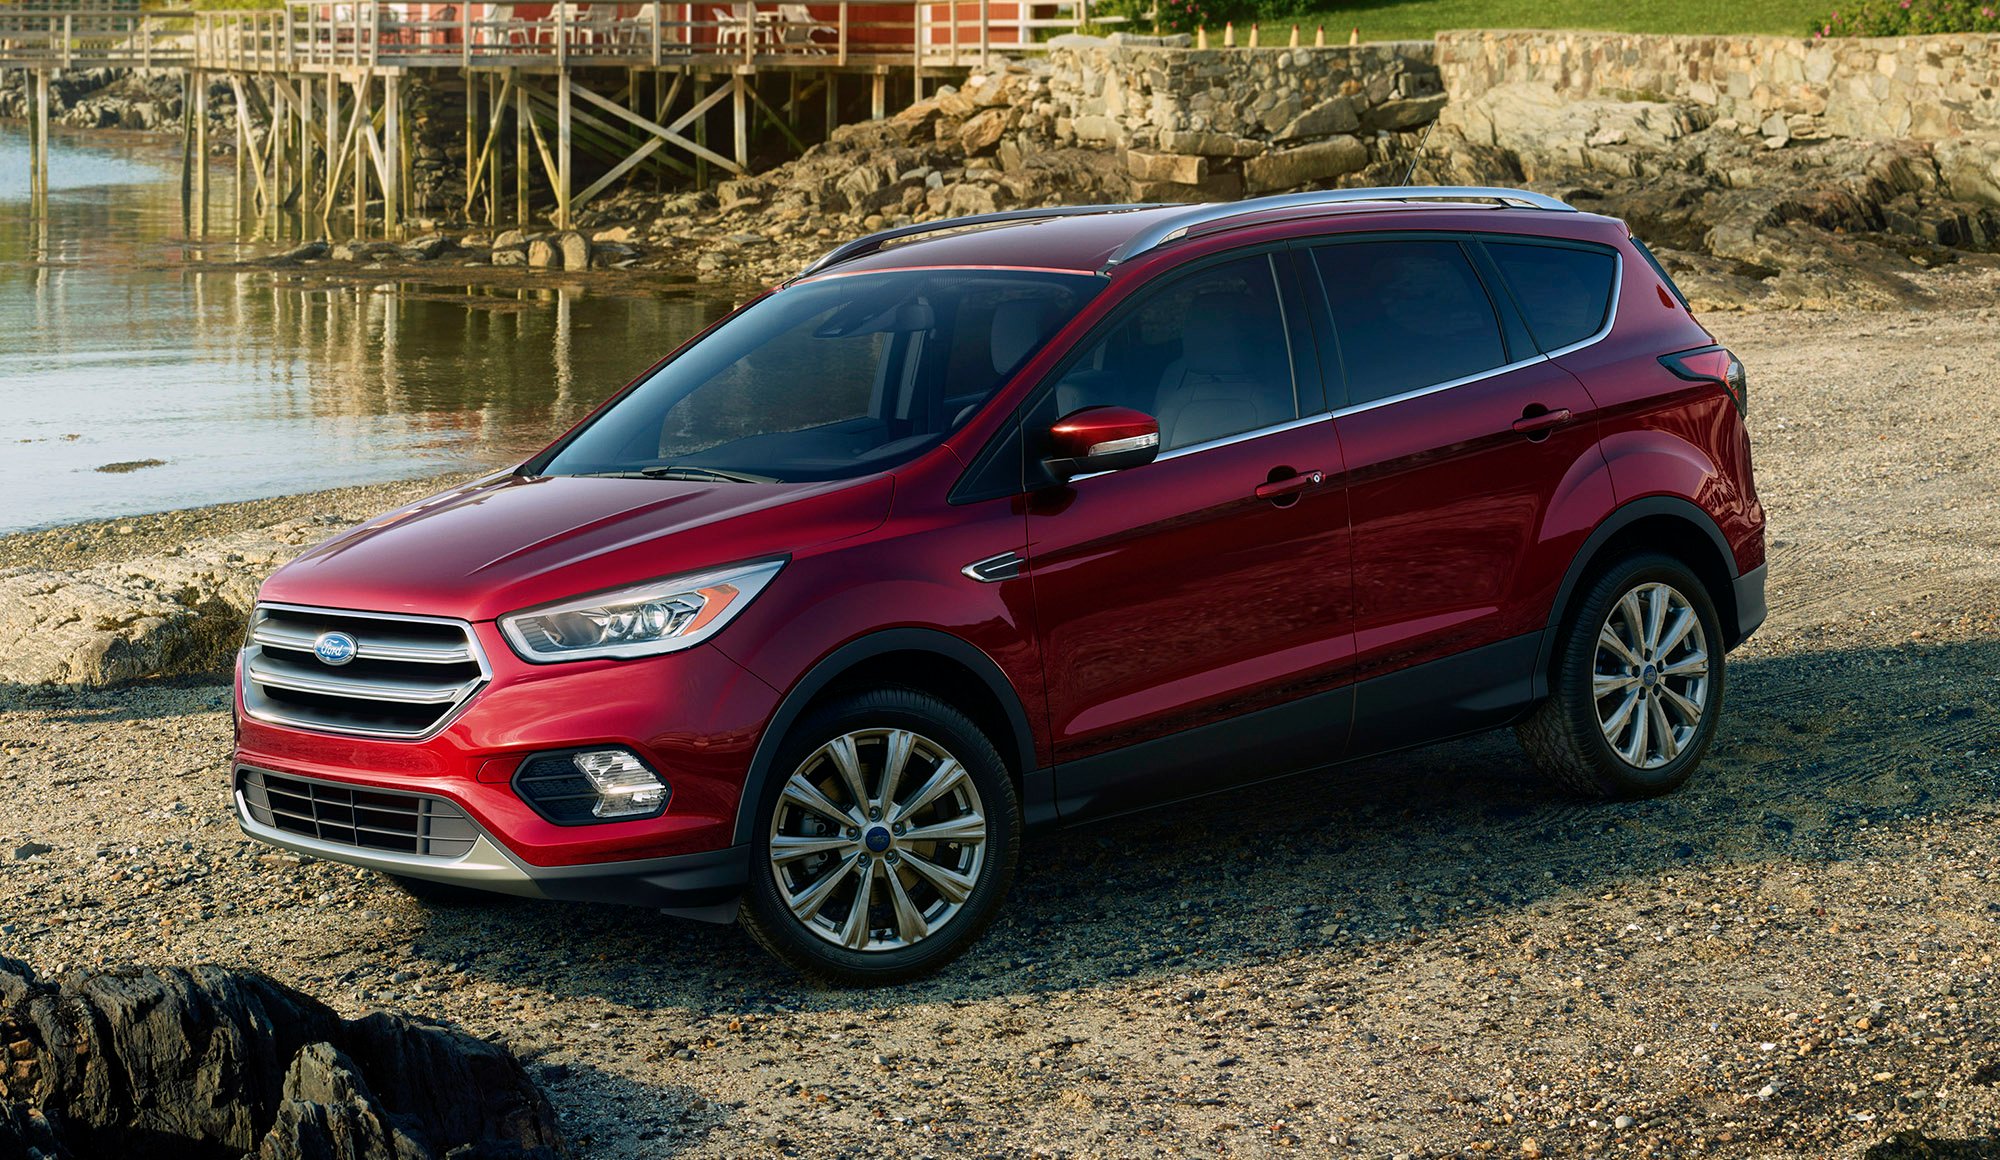 2017 Ford Kuga revealed as facelifted Escape: New looks ... ford kuga fuse box 